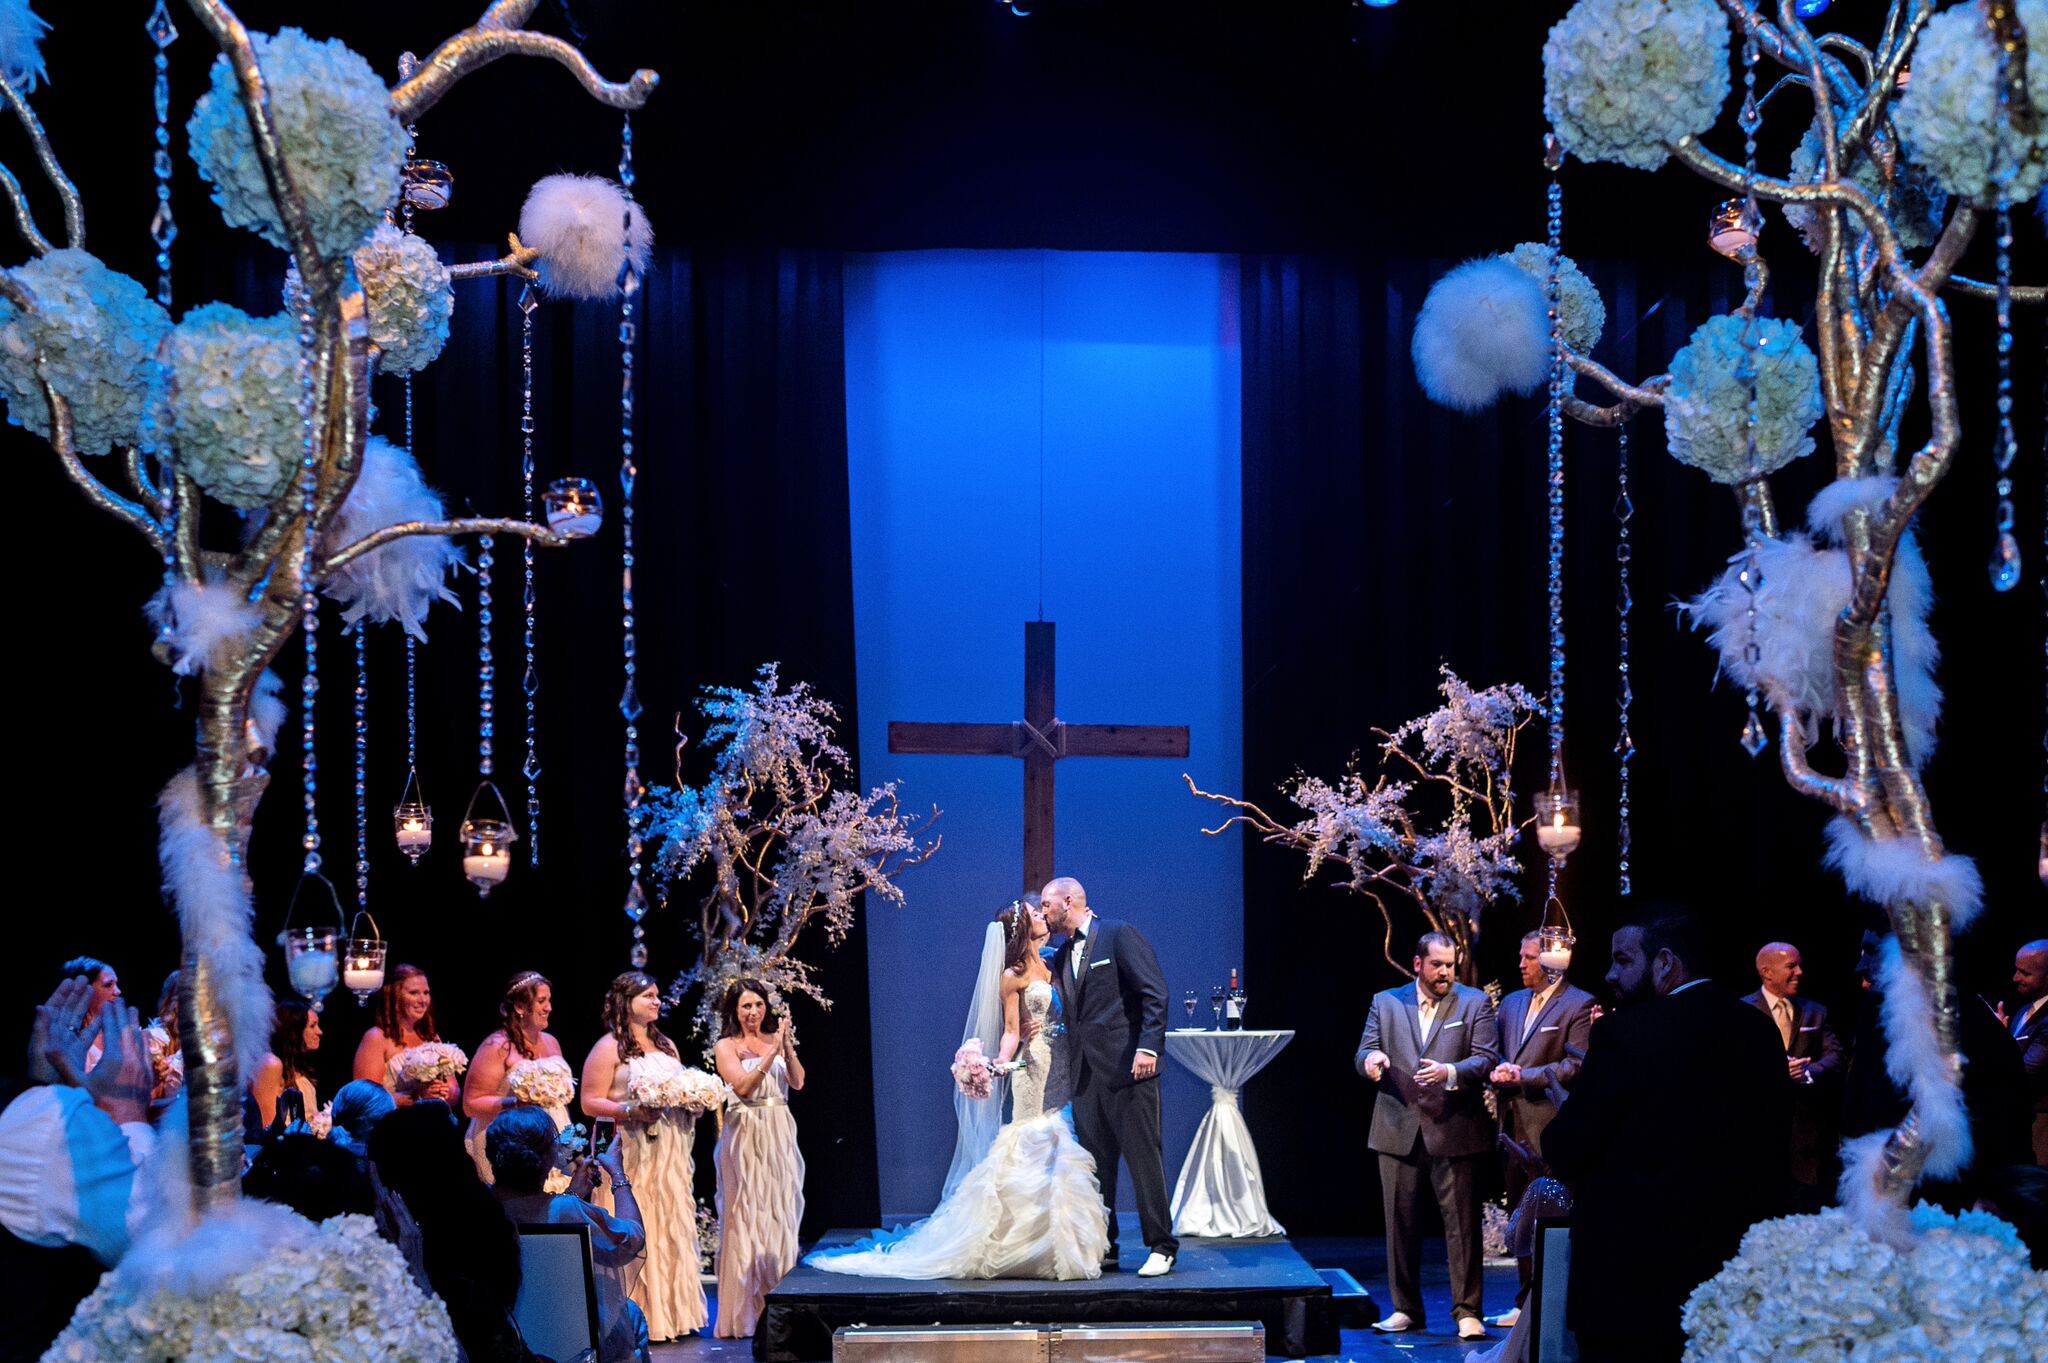  Wedding Photographer: Kristen Weaver Photography | Wedding Ceremony: Dr. Phillips Center for the Performing Arts |&nbsp;Wedding Planner: An Affair To Remember 